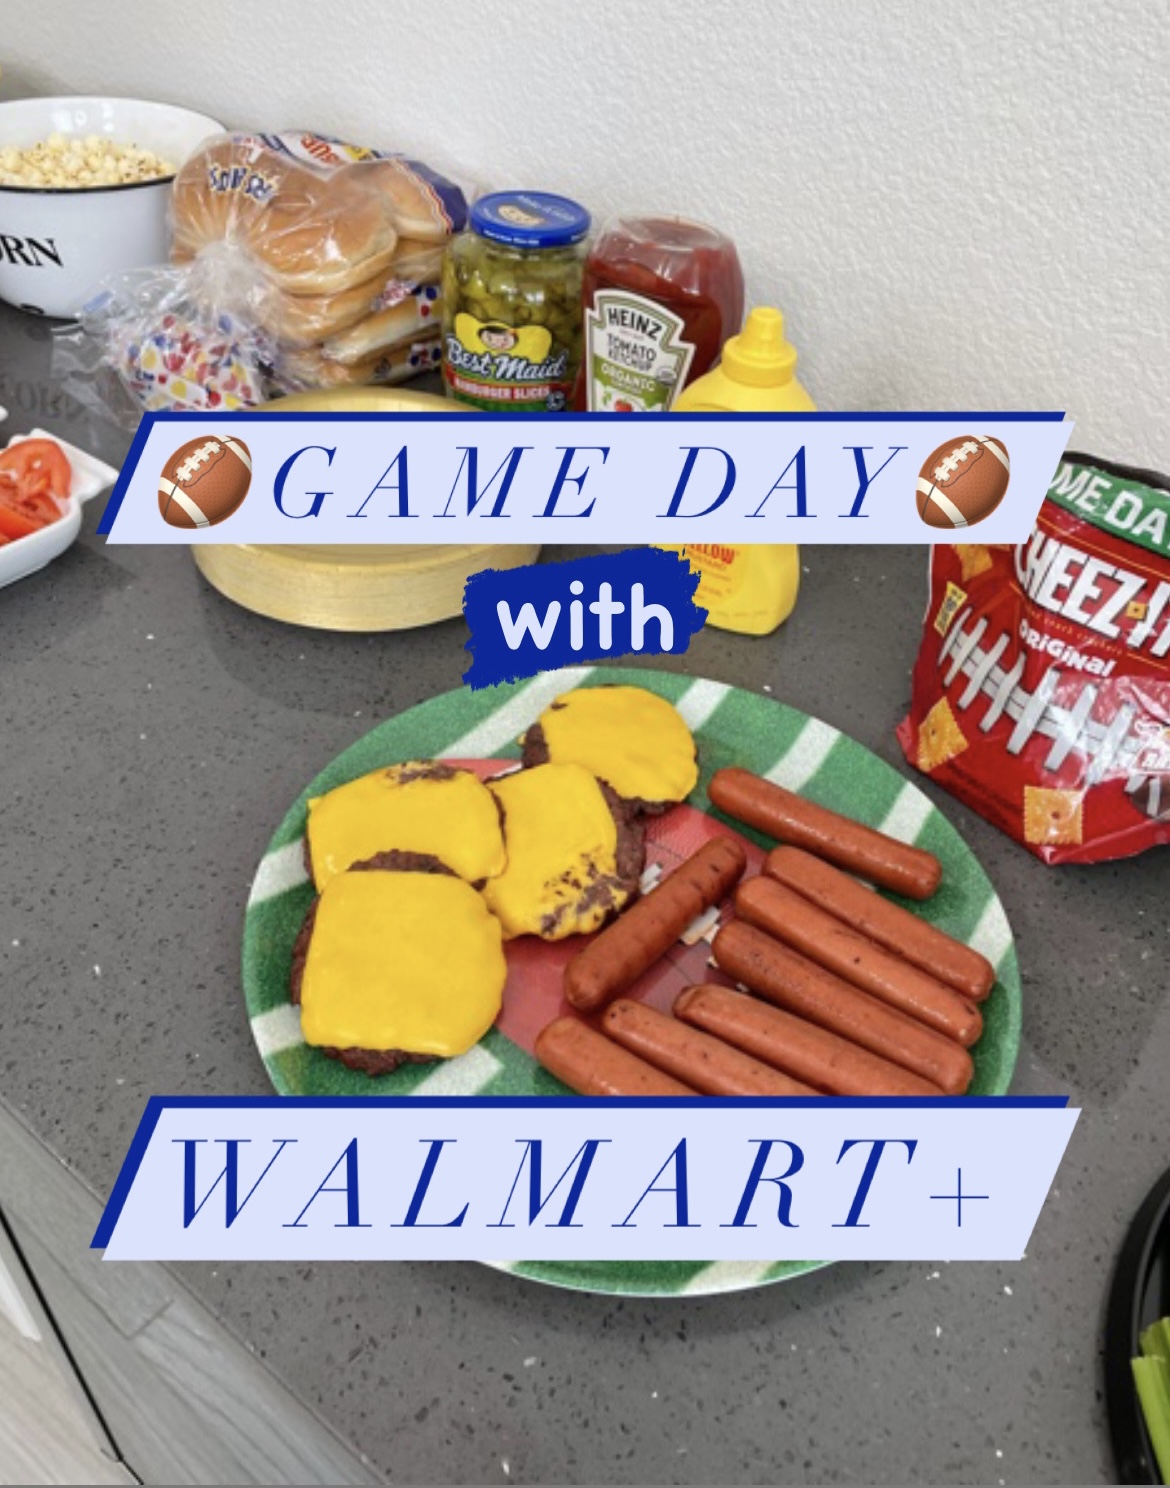 Game day with Walmart+